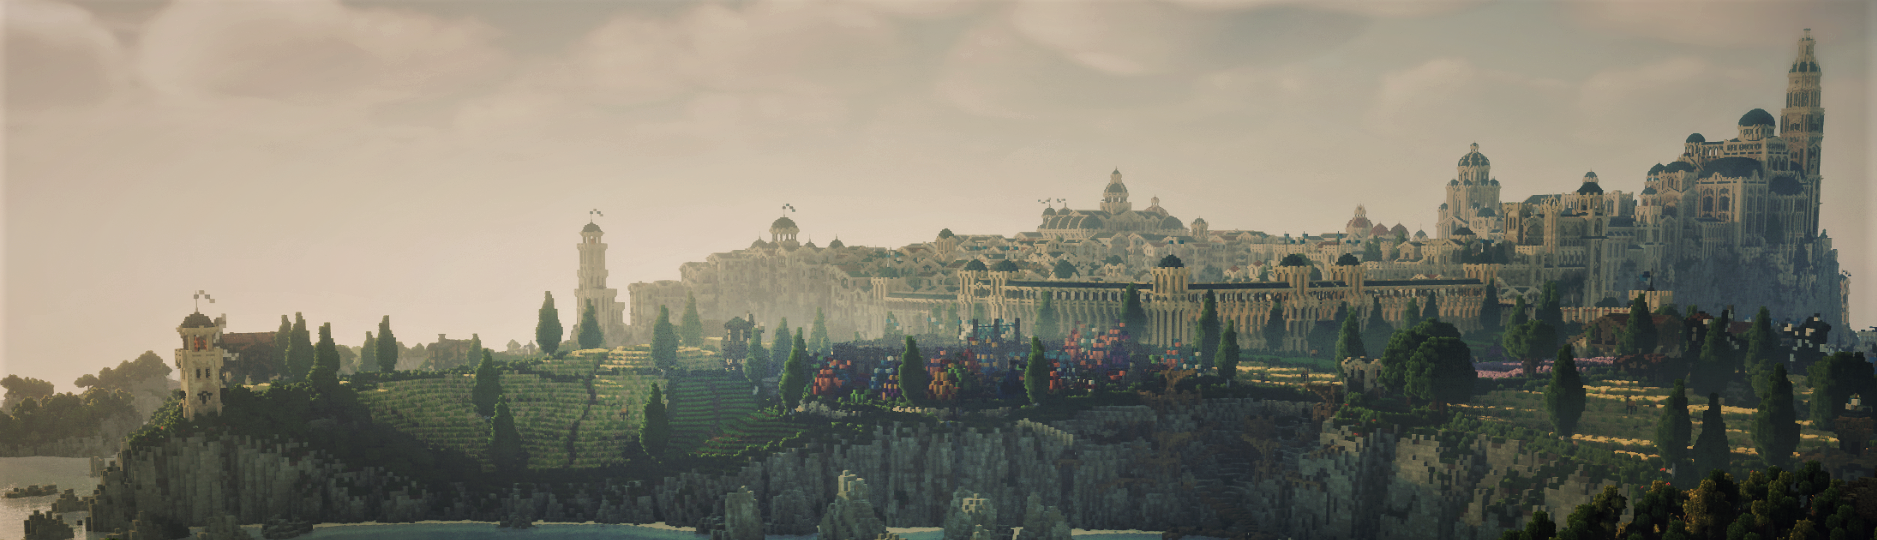 Givet_Dol_Amroth_Side_View_Again.png